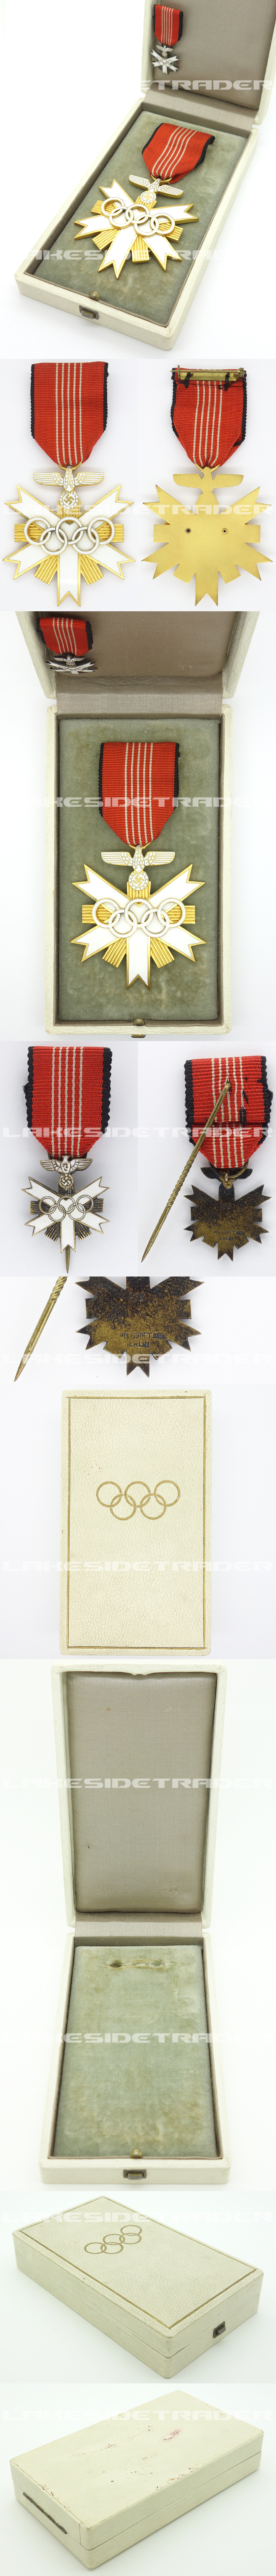 Cased 2nd Class Olympic Decoration 1936 with Miniature